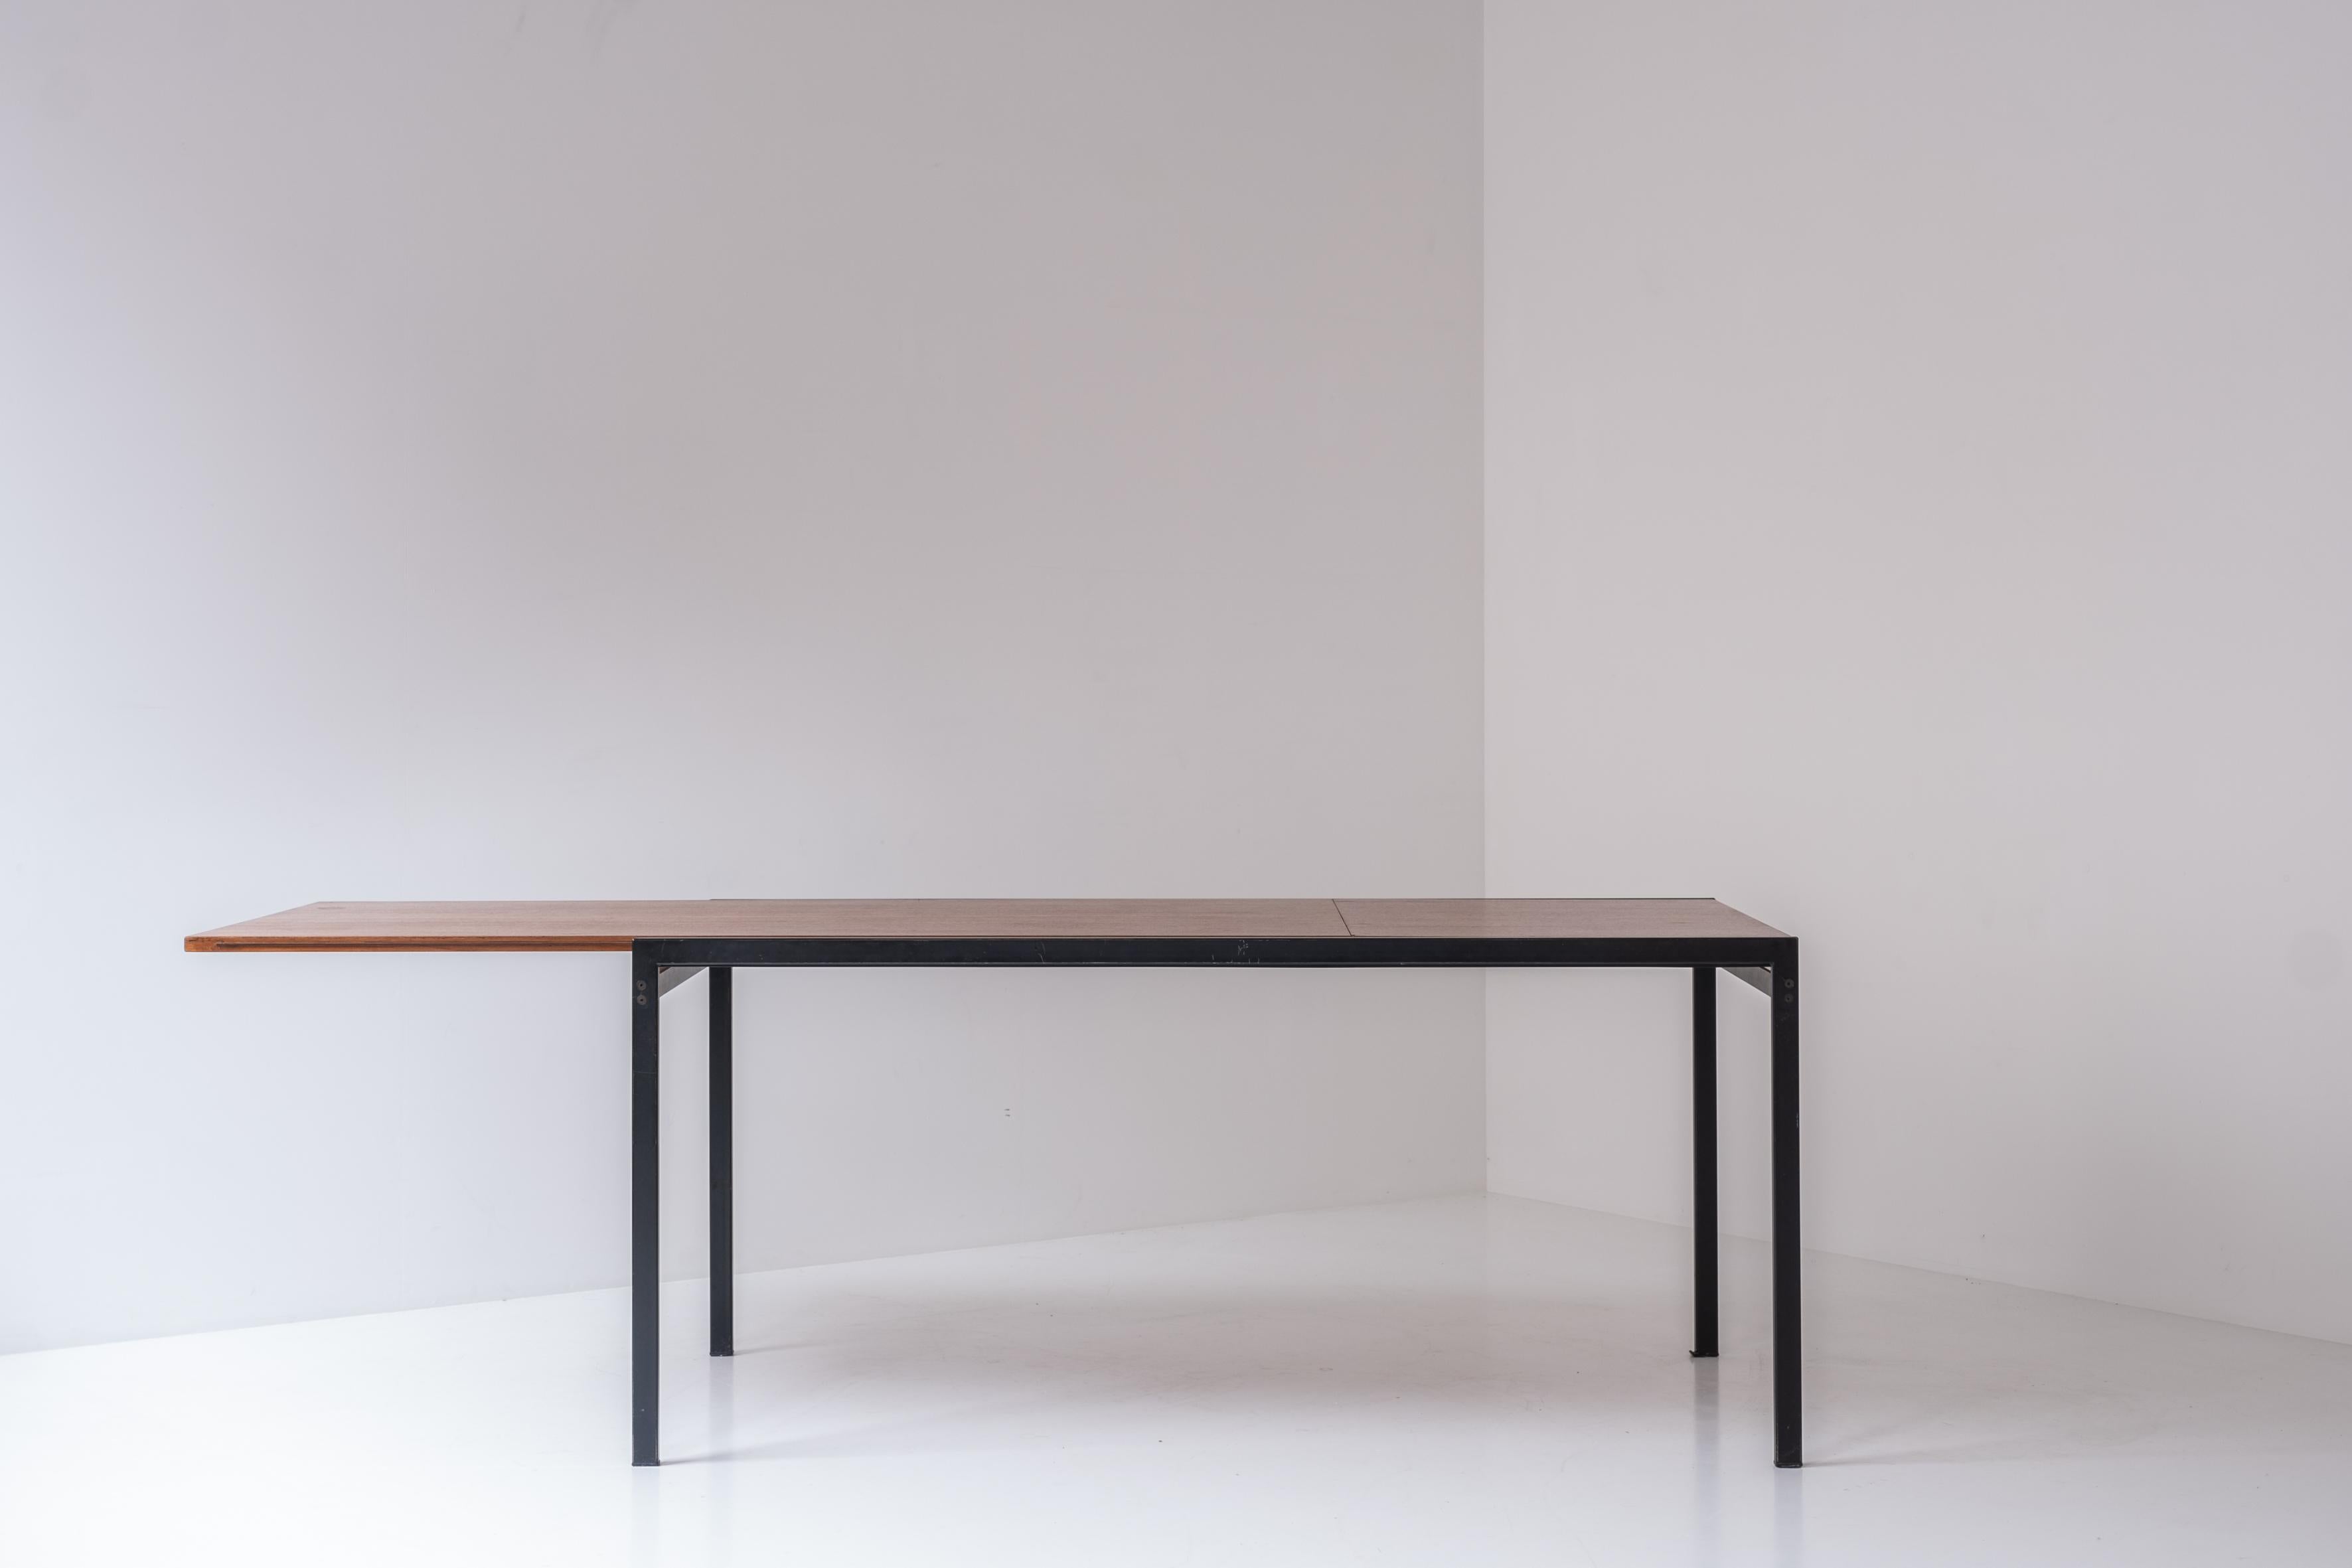 Mid-Century Modern Dining table by Cees Braakman for Pastoe, The Netherlands 1960s.